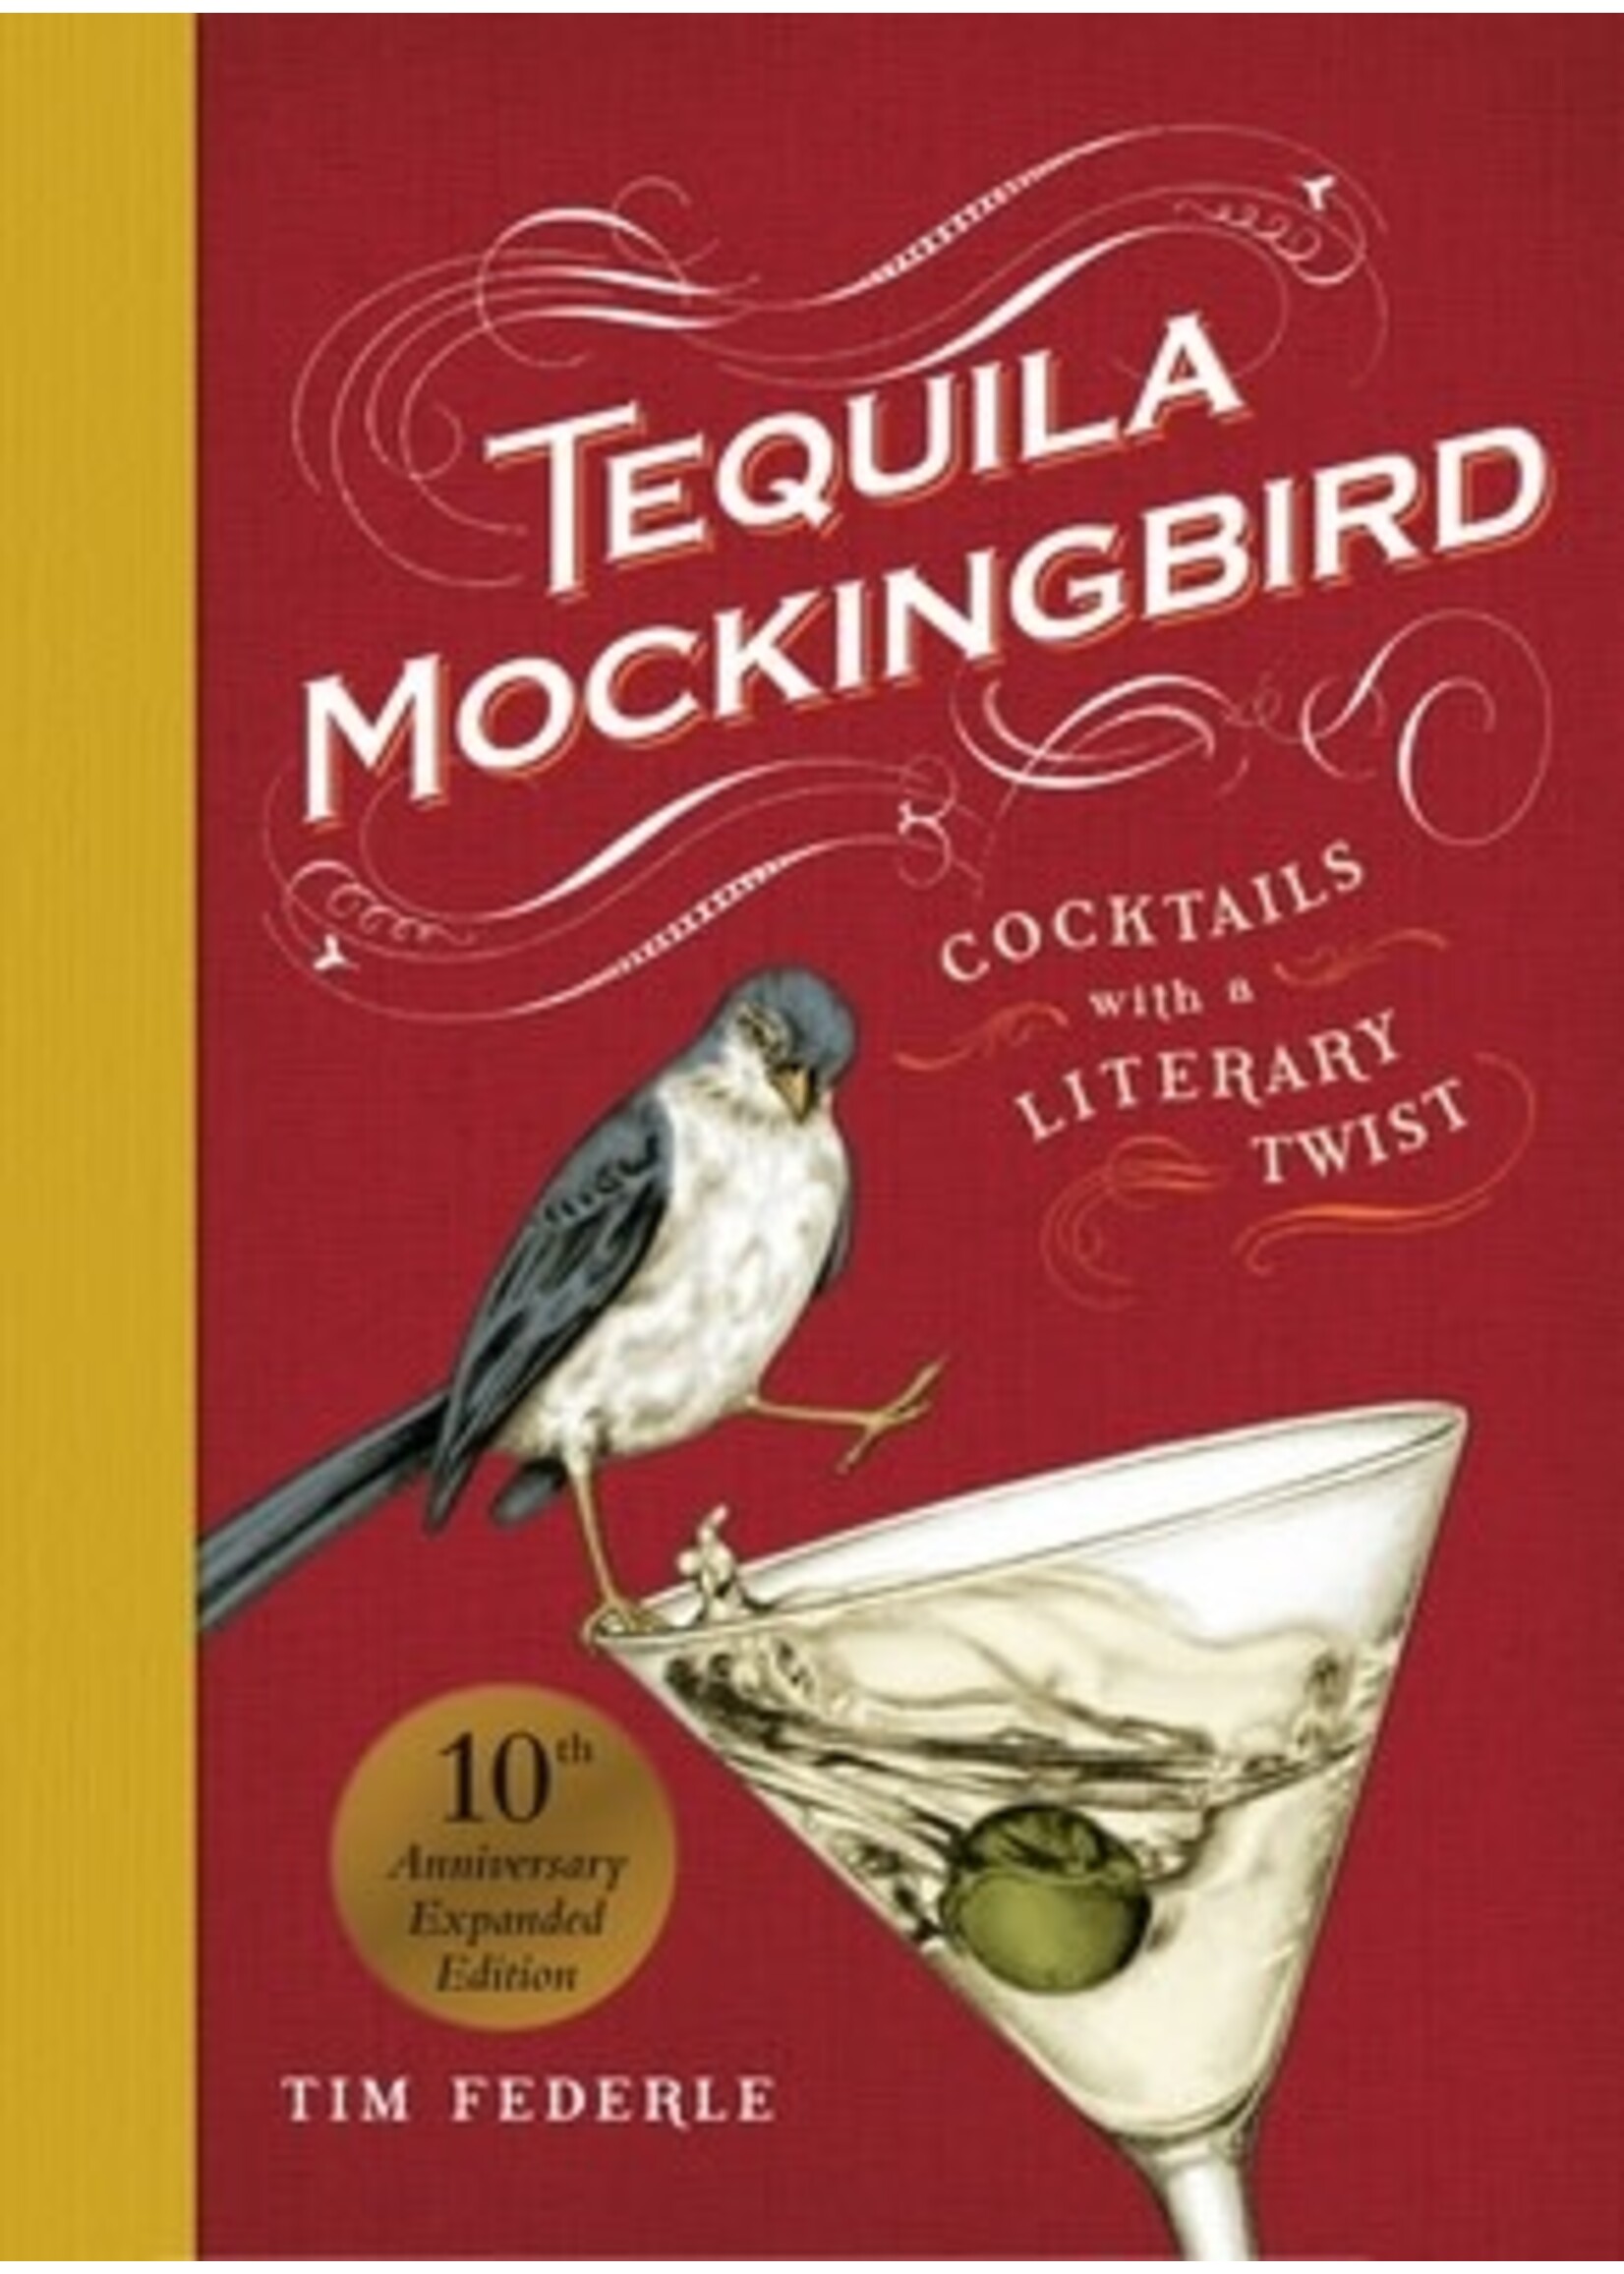 Tequila Mockingbird (10th Anniversary Expanded Edition): Cocktails with a Literary Twist by Tim Federle, Lauren Mortimer